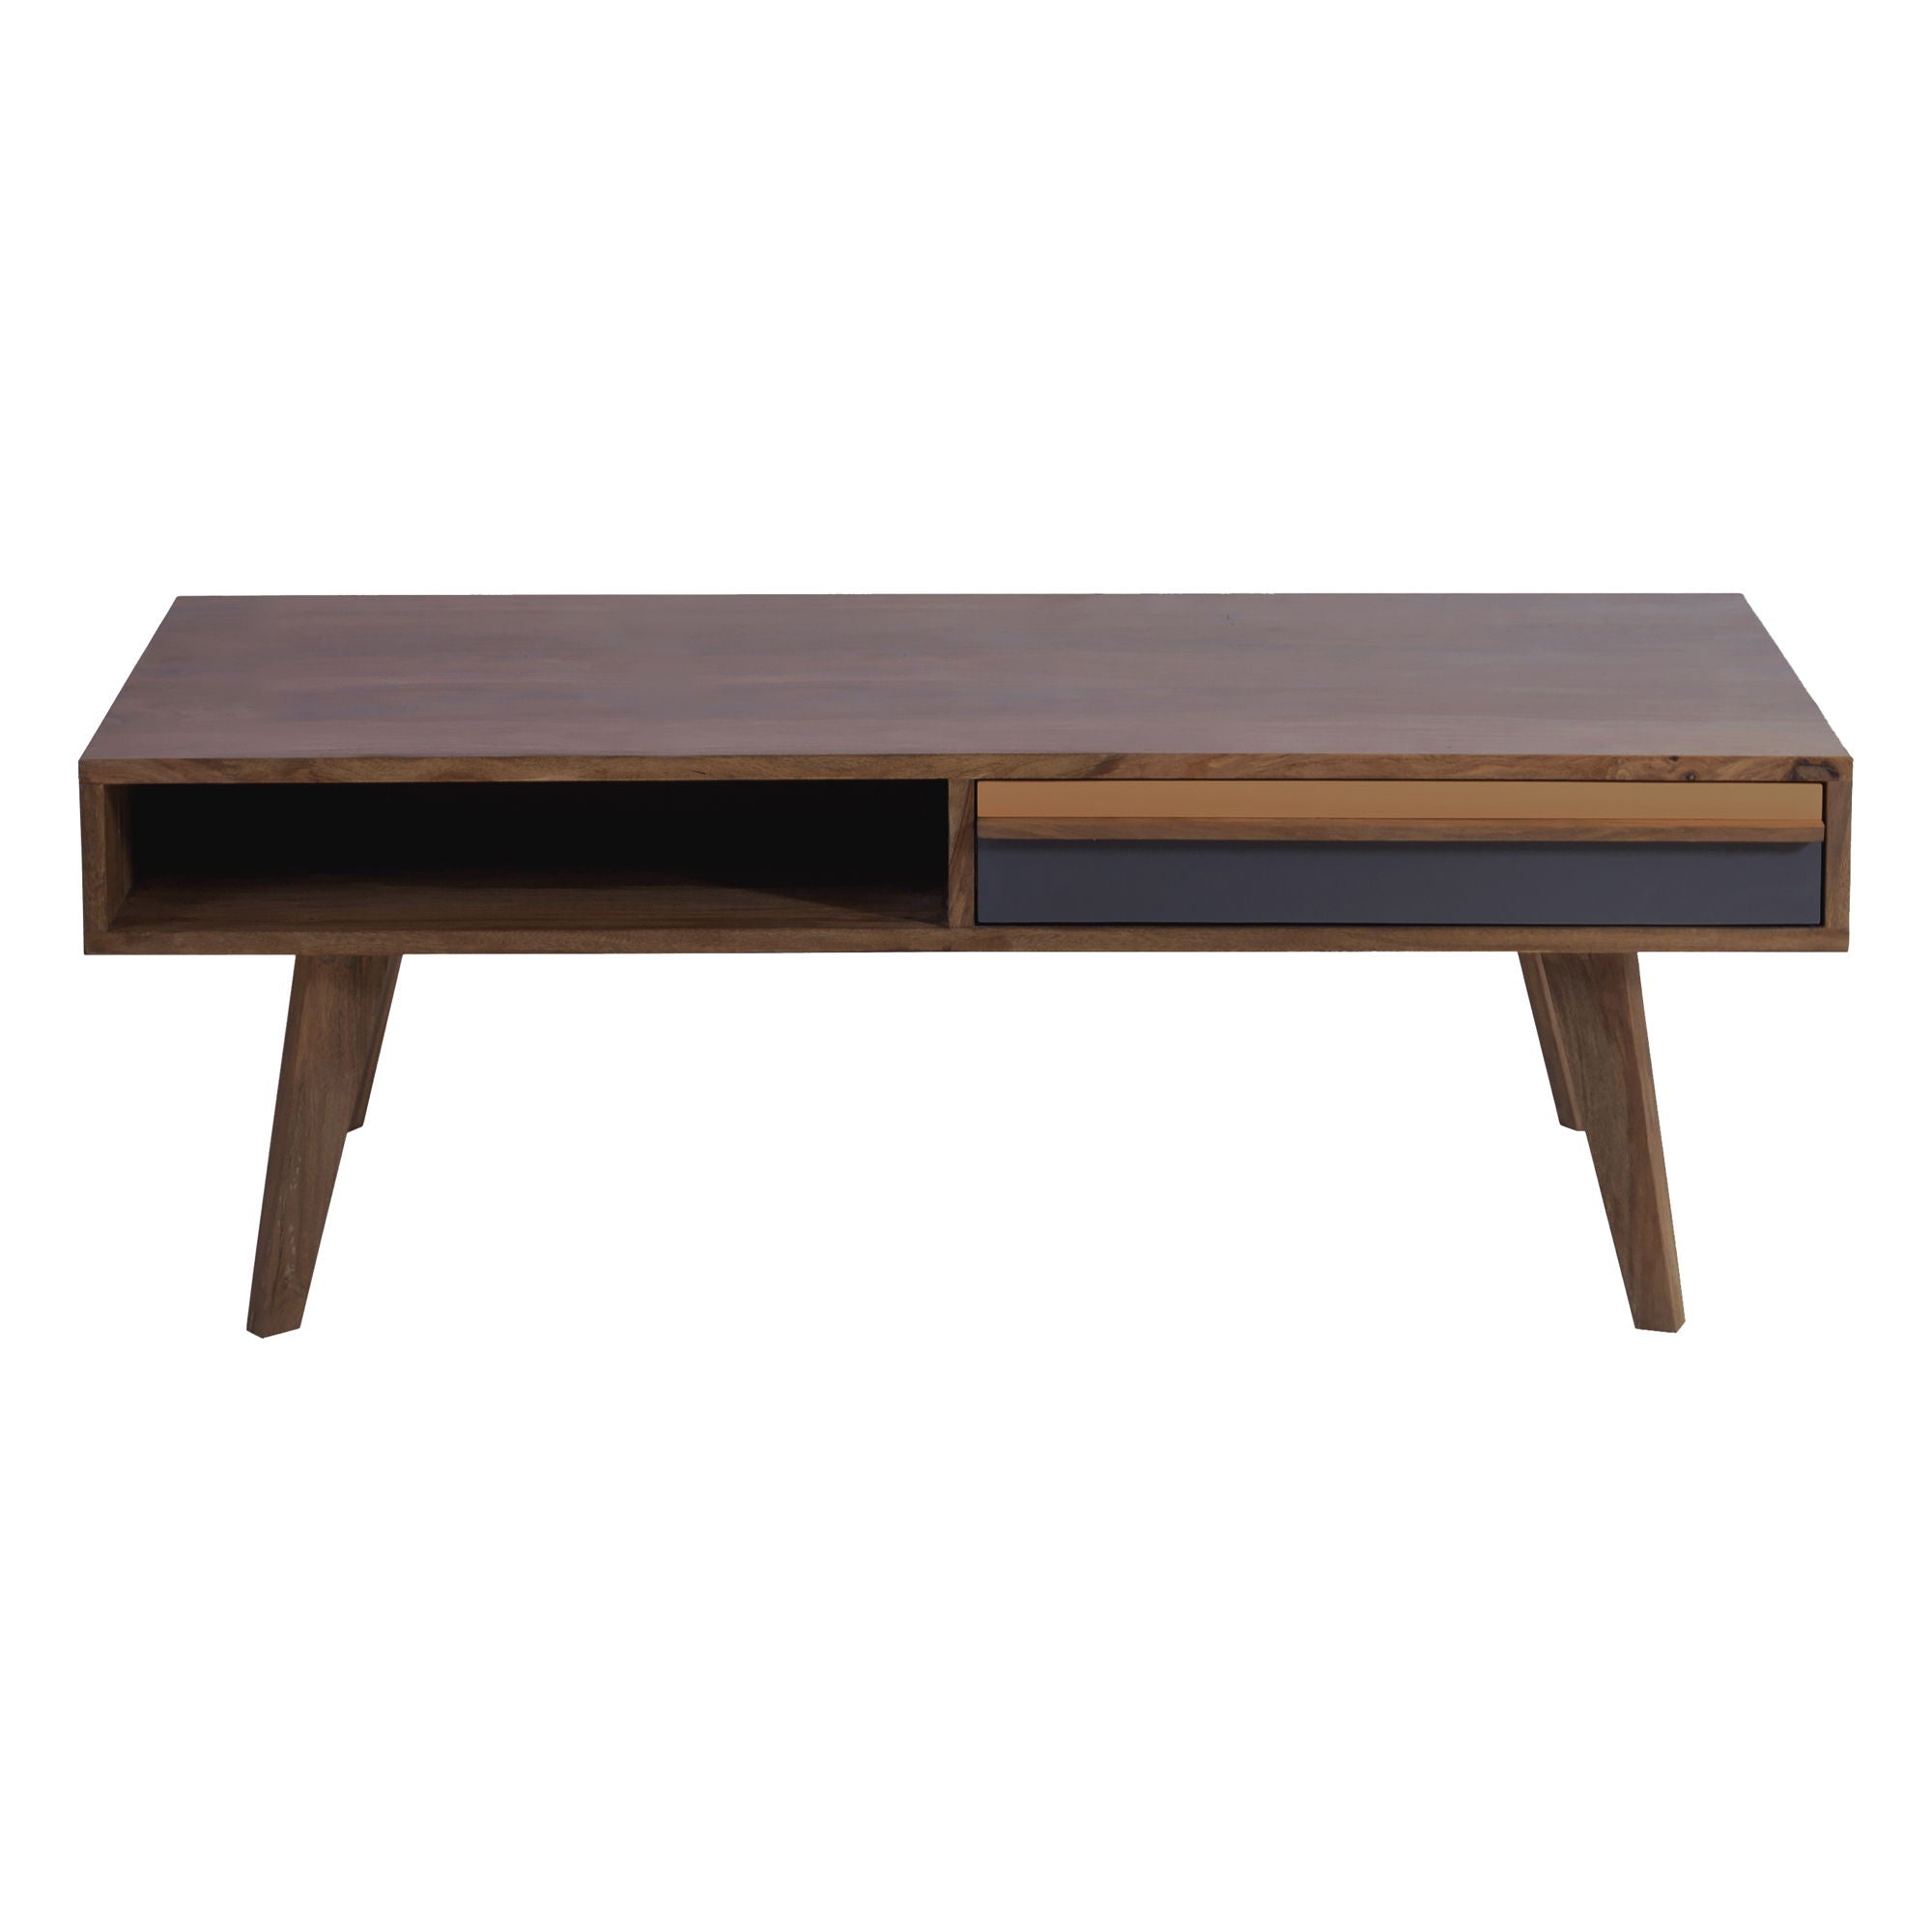 Bliss - Coffee Table - Brown